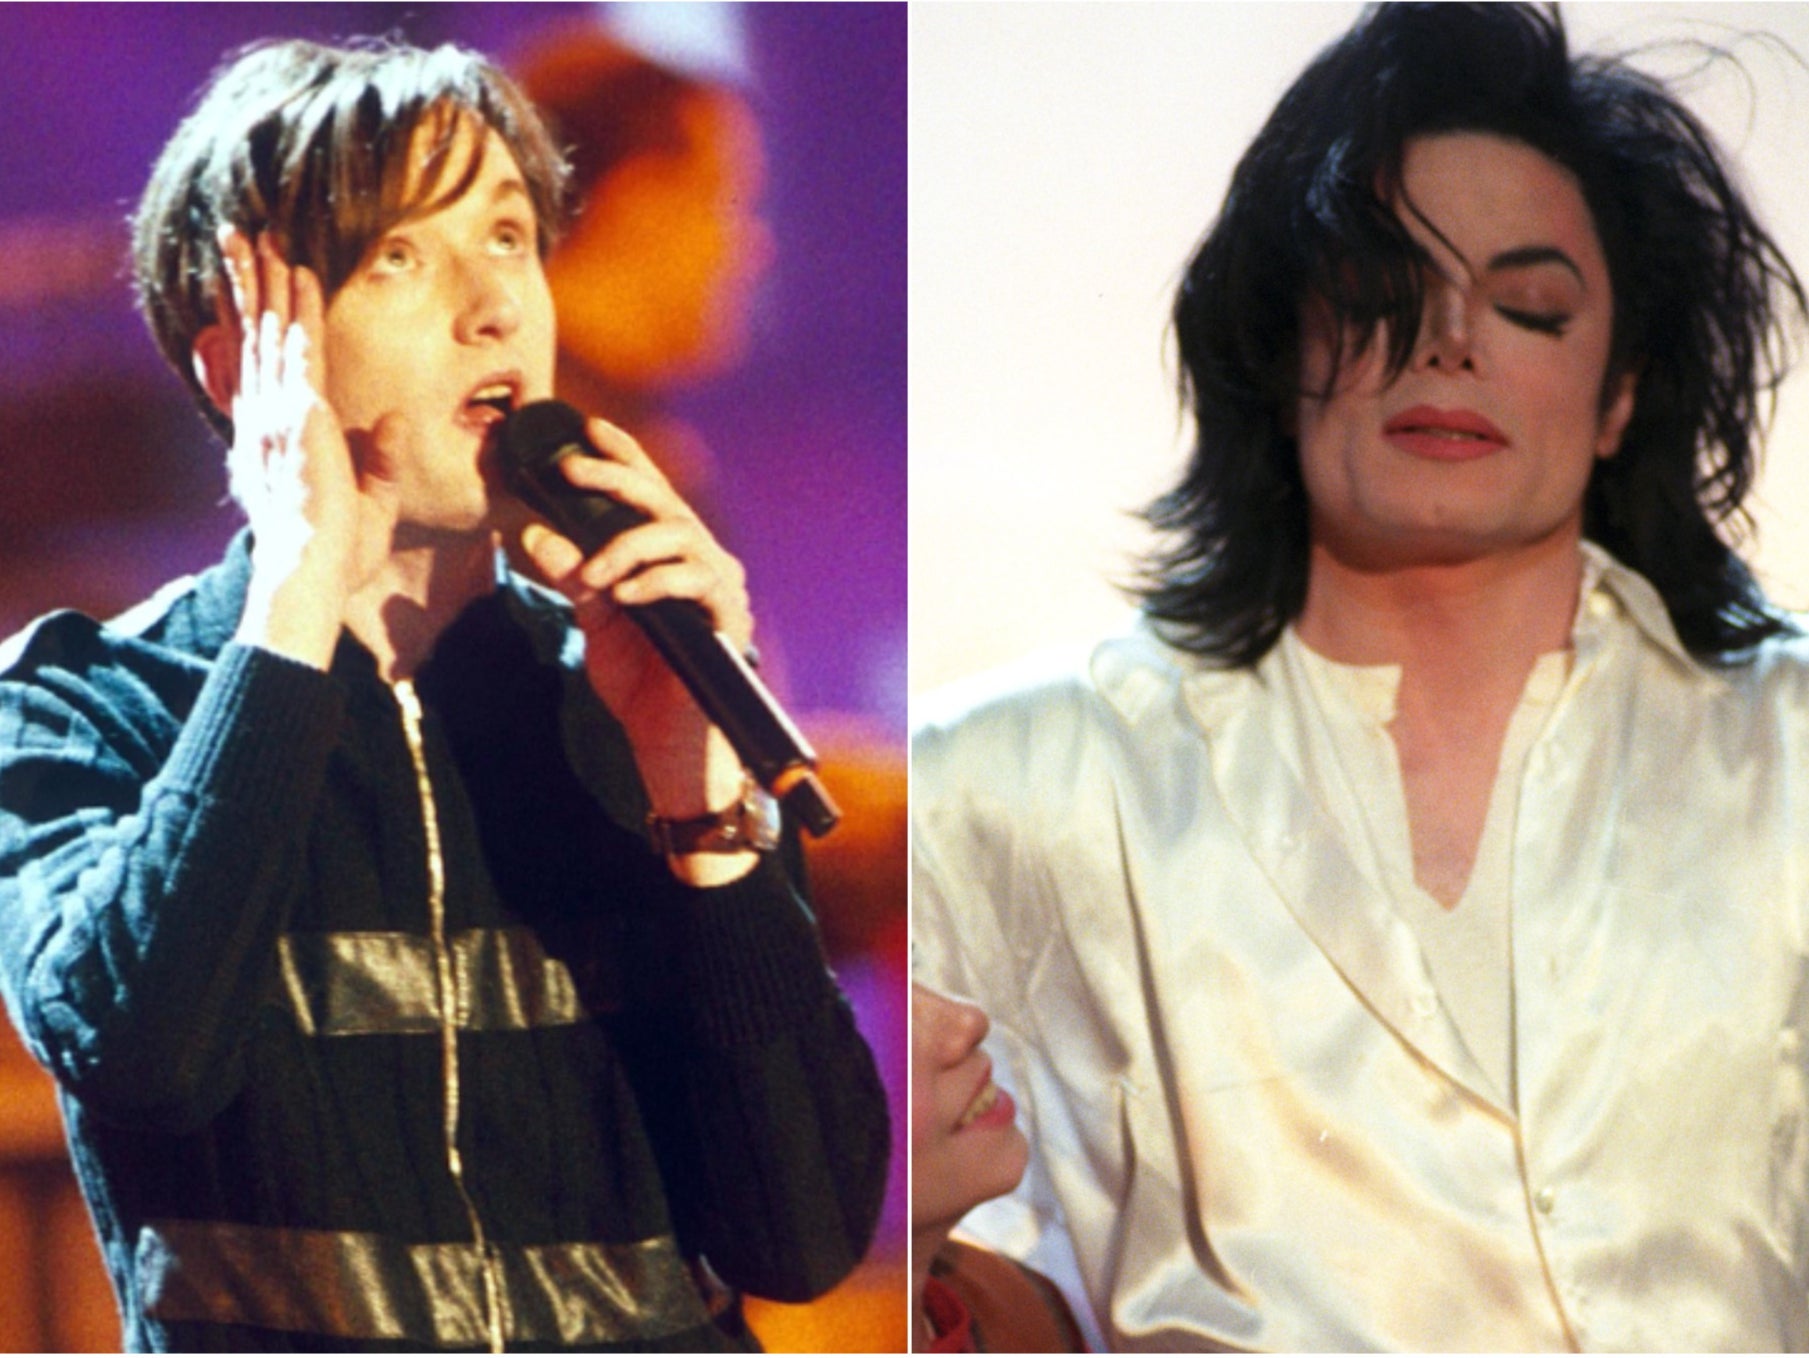 Jarvis Cocker (left) famously waggled his backside at the audience during Michael Jackson’s performance at the Brit Awards in 1996